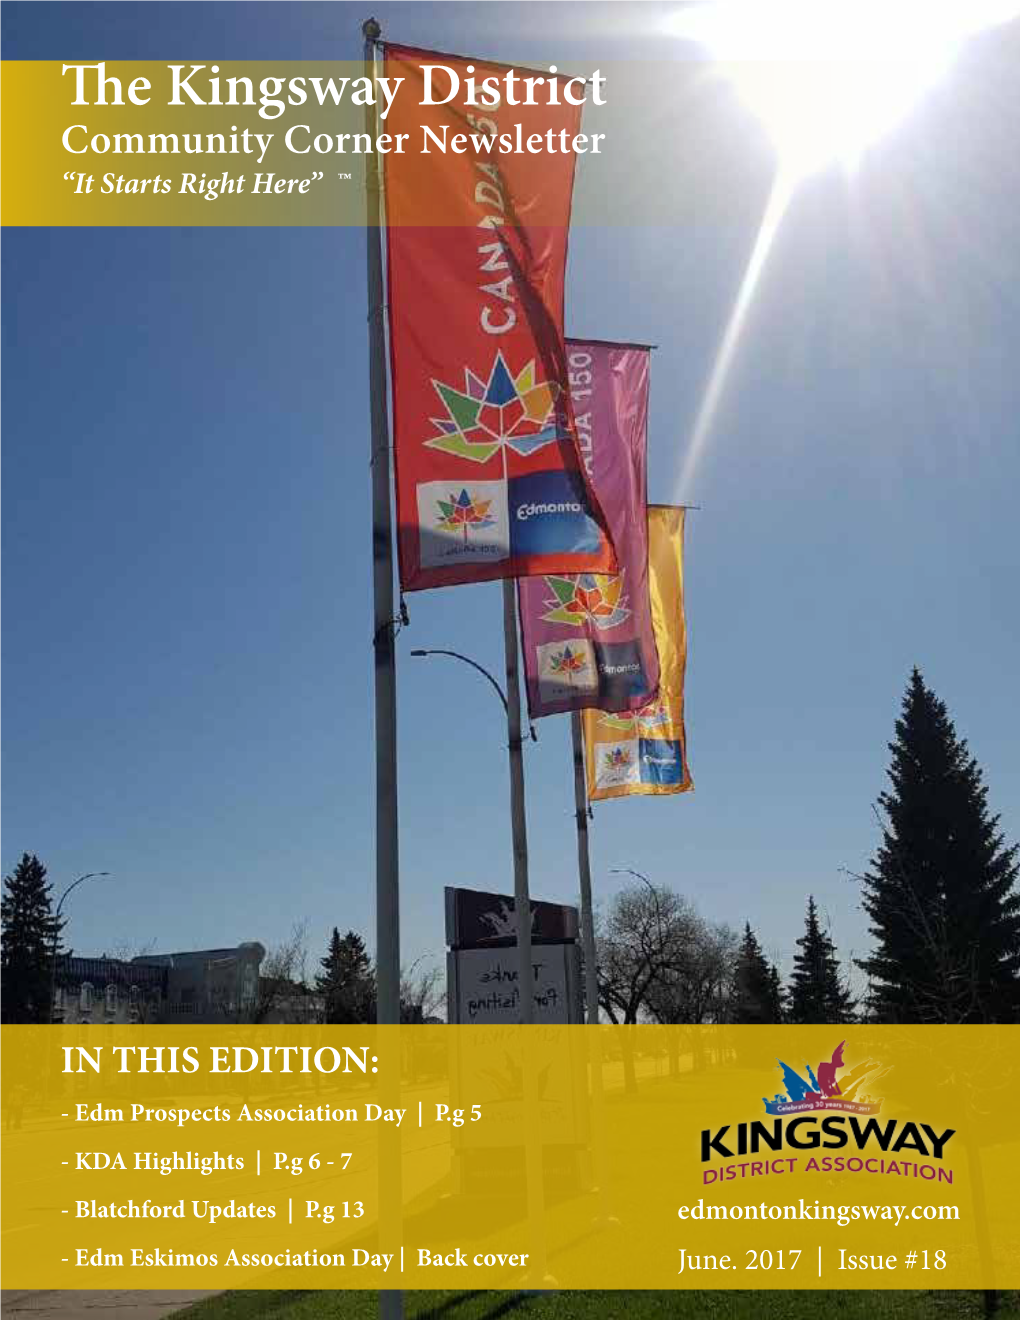 The Kingsway District Community Corner Newsletter “It Starts Right Here” ™